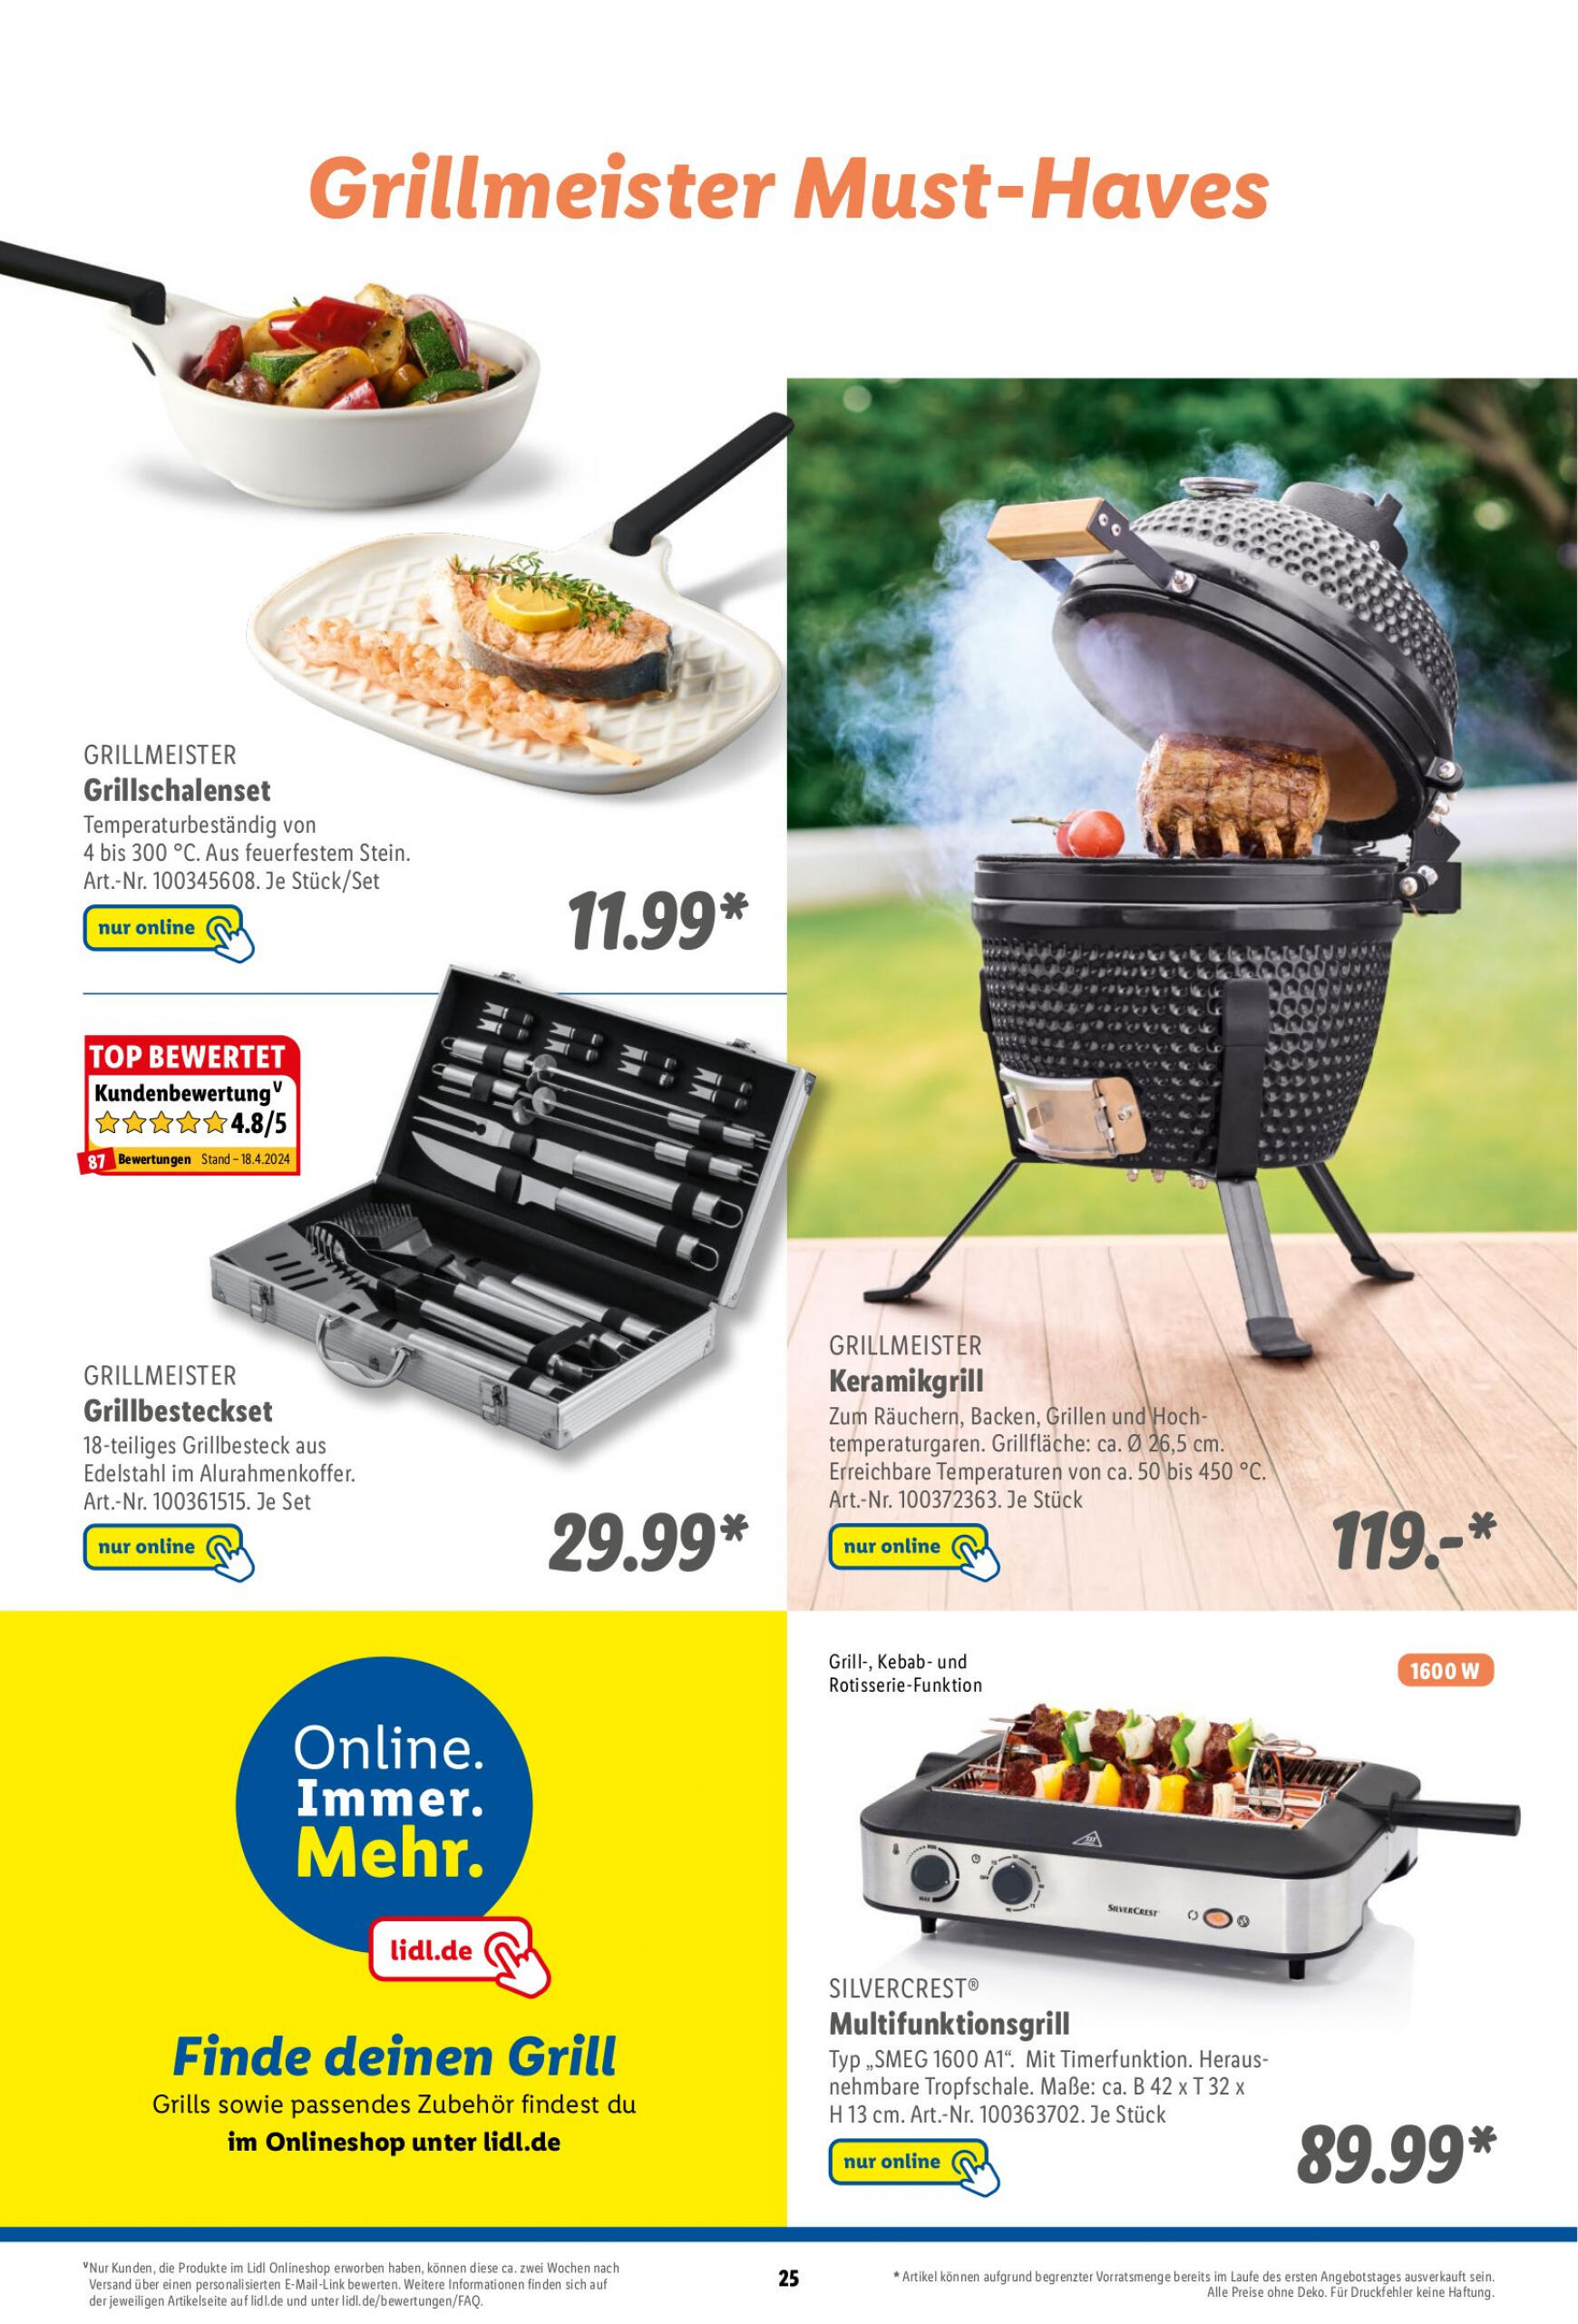 lidl - Flyer Lidl - Grillmagazin aktuell 22.04. - 30.06. - page: 25